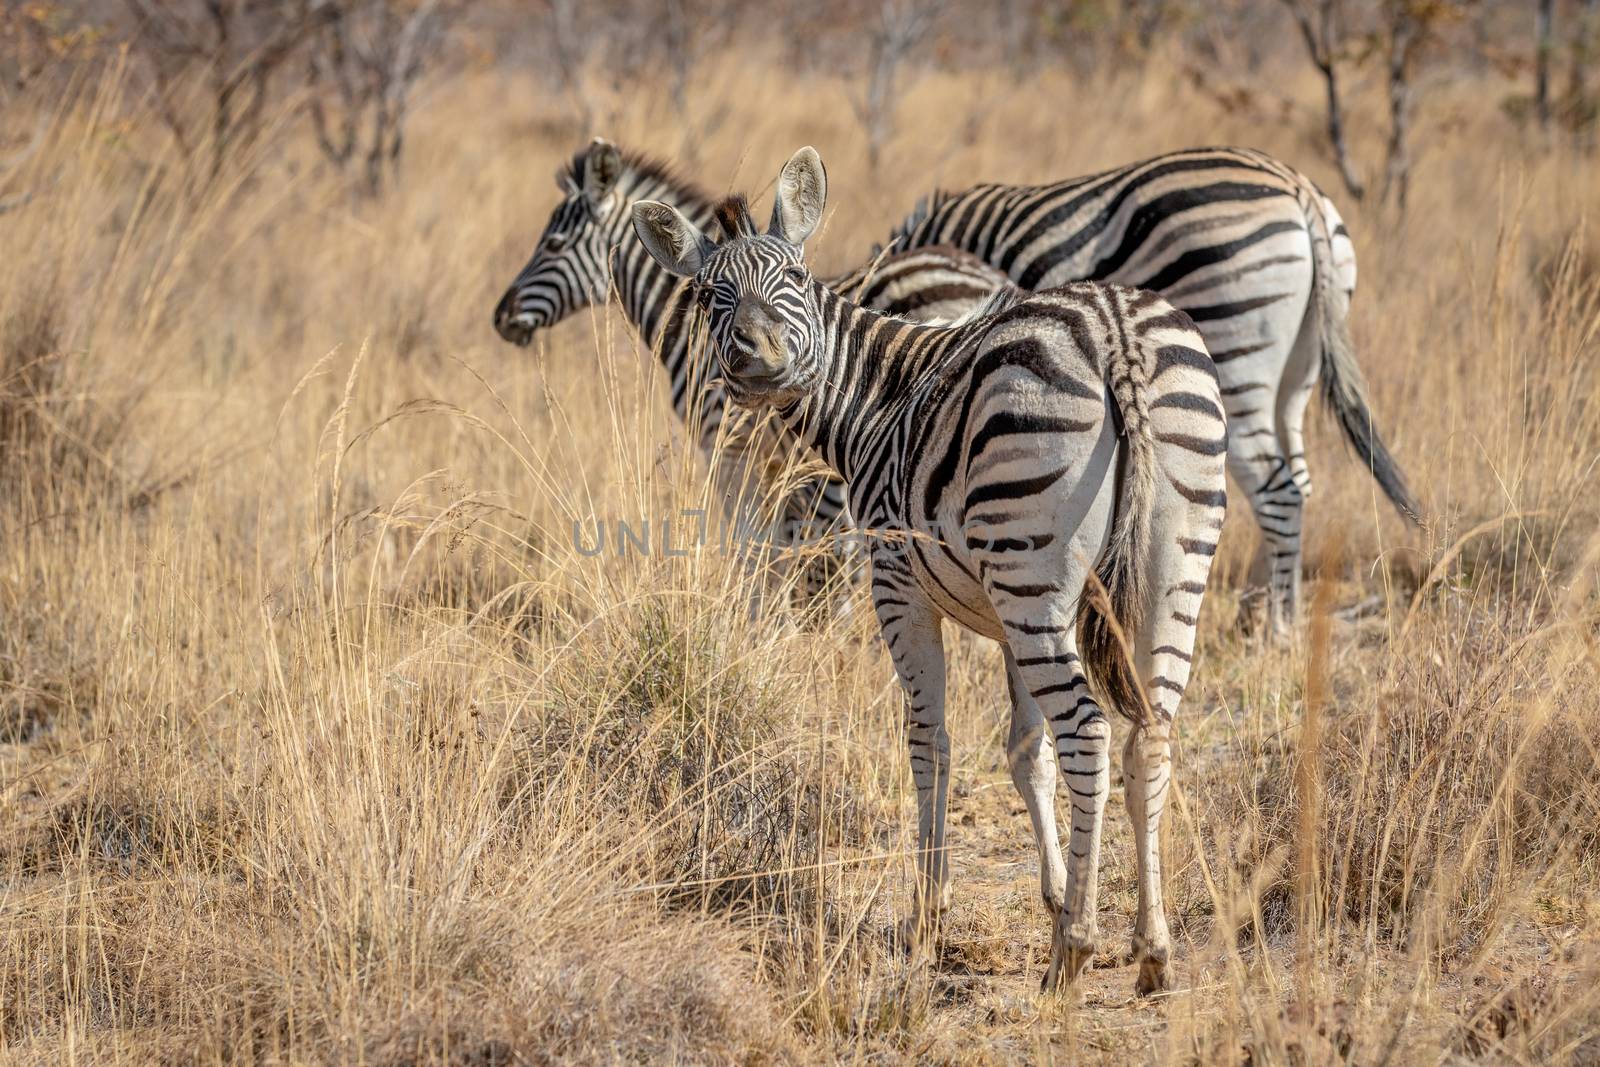 Zebras standing in the high grass in the Welgevonden game reserve, South Africa.